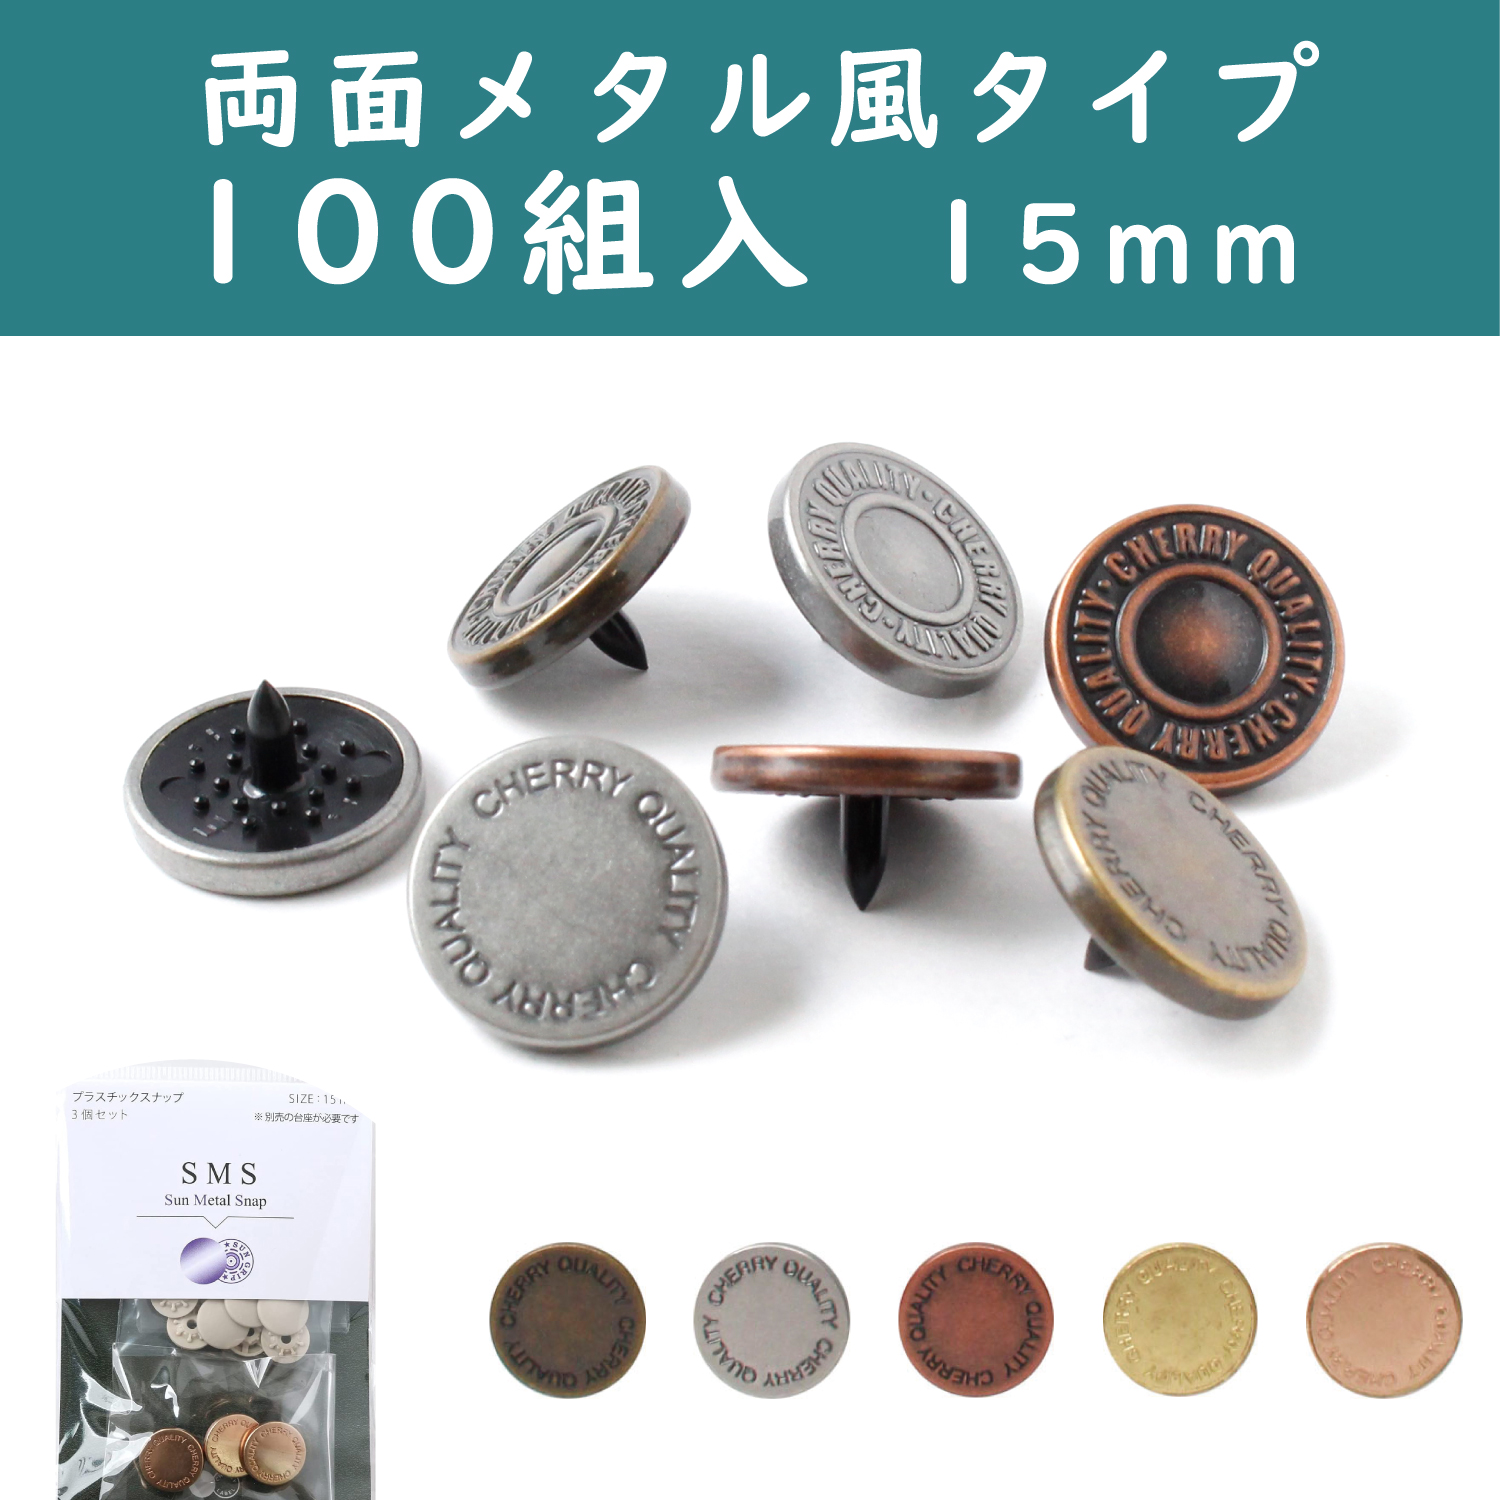 SMS15-2-100 SUN METAL SNAP", Metal-like Snap Button　type1 15mm 100set (pack)